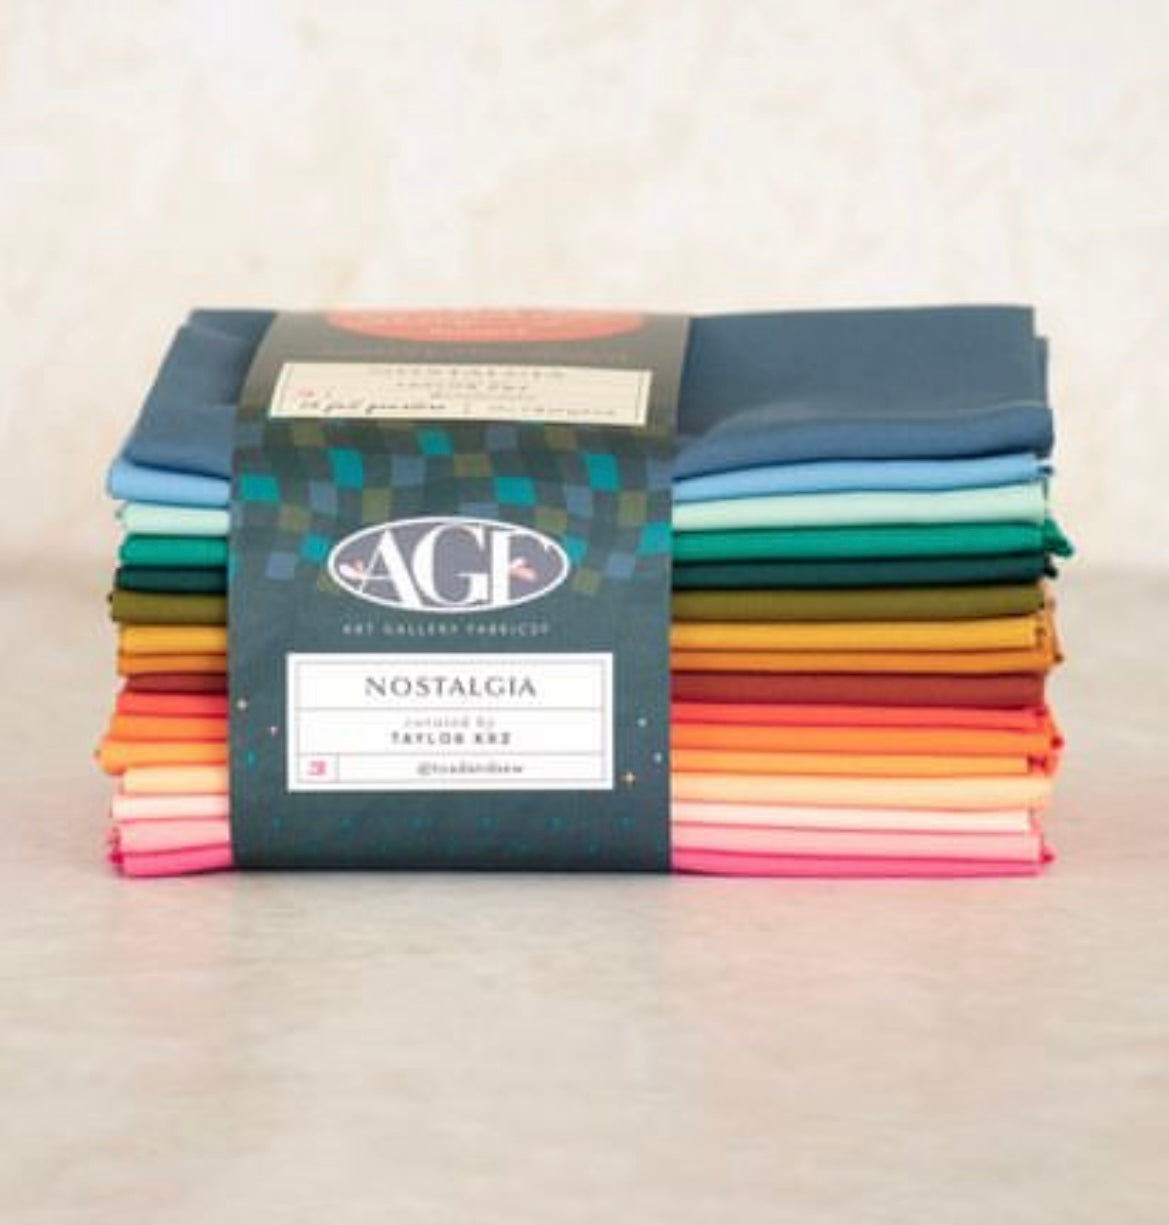 Nostalgia AGF Sewcialite Bundle Curated by Taylor Krz of Toad & Sew - 16 fat quarters of pure solids